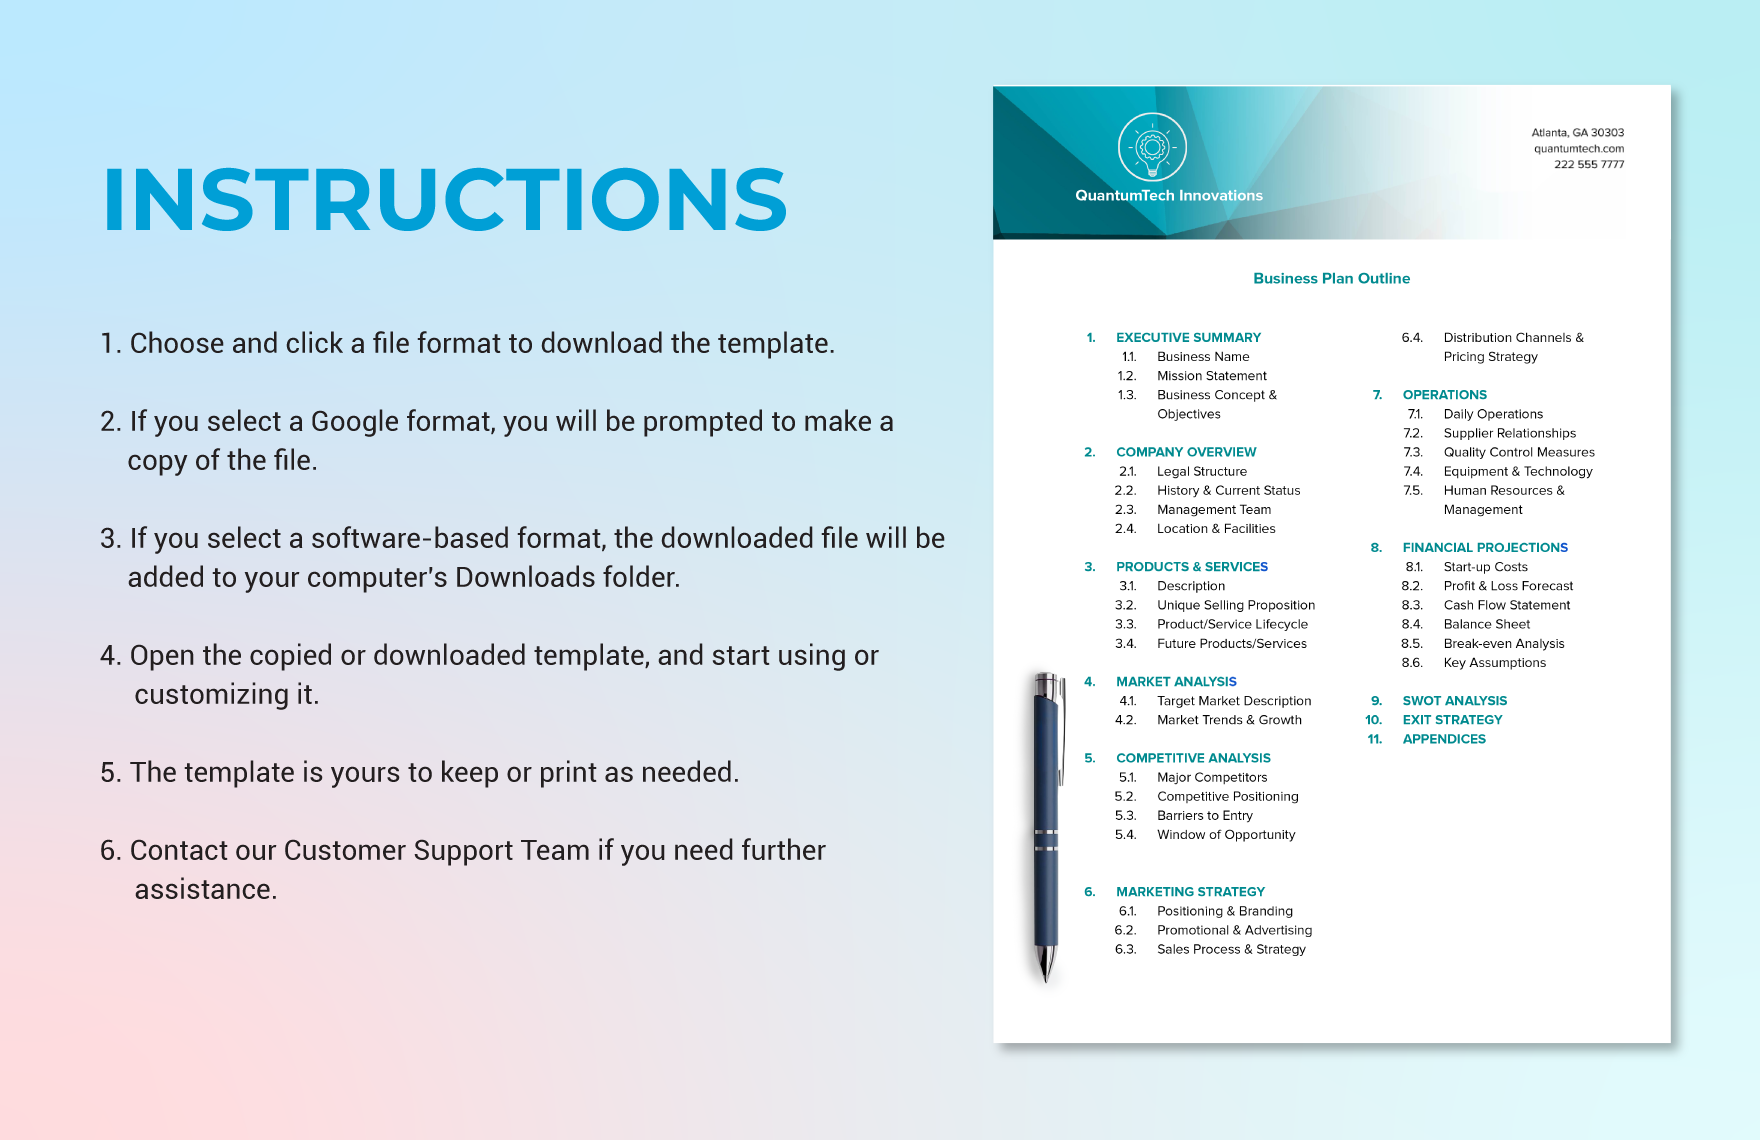 Business Plan Outline Template